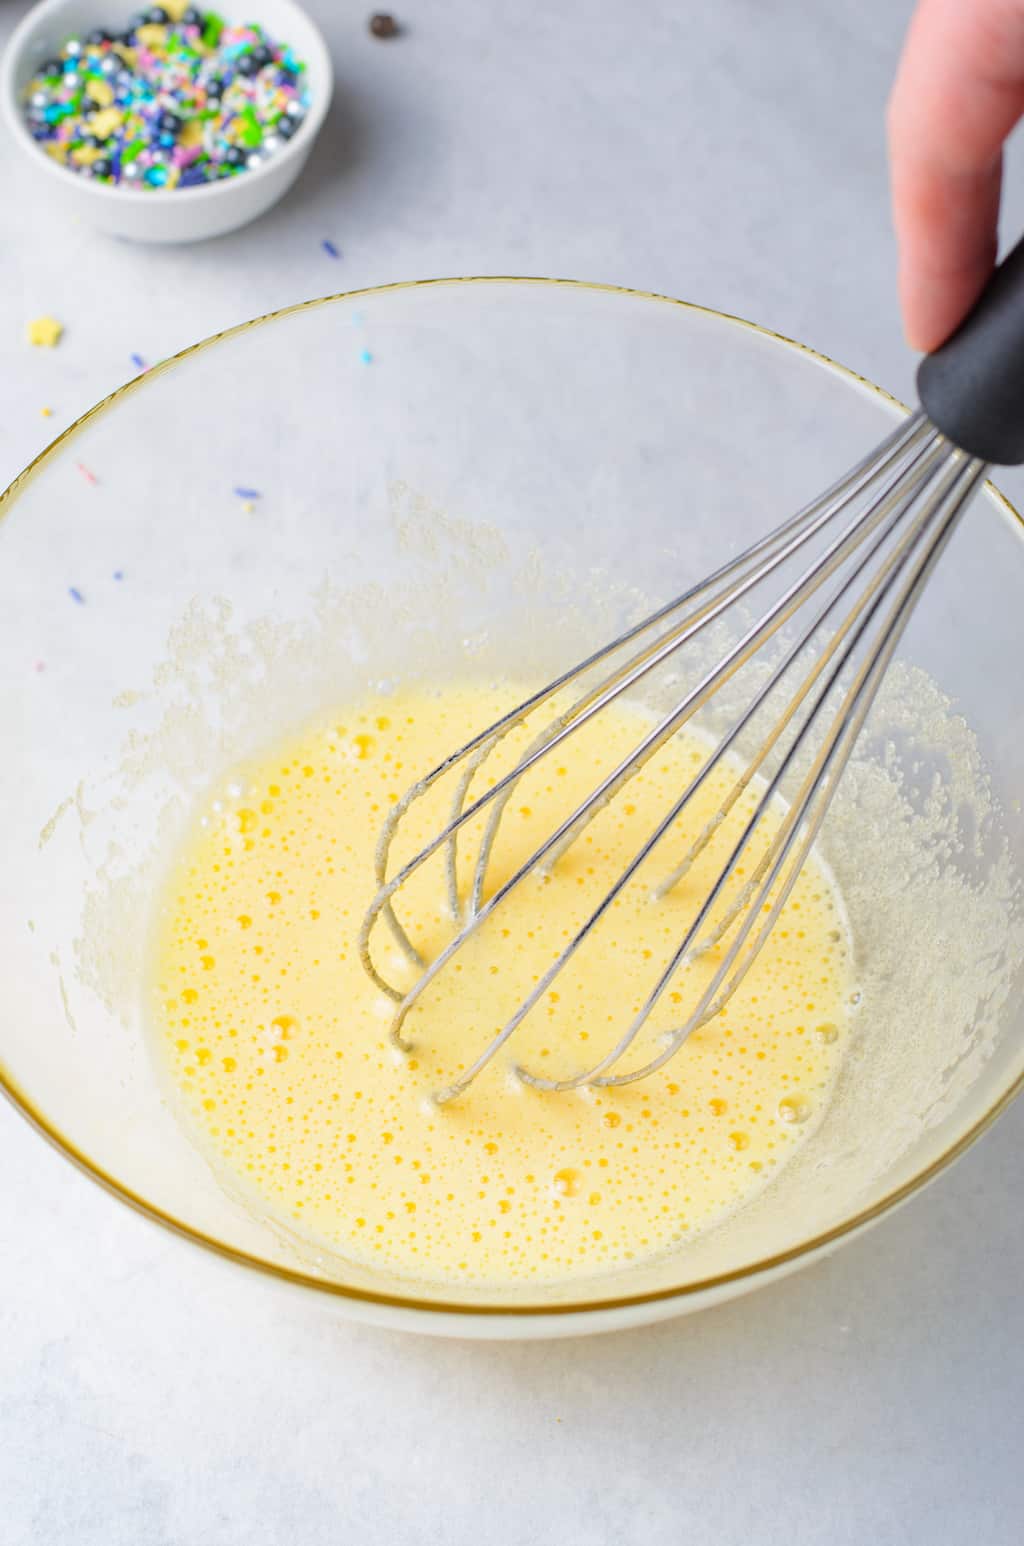 whisk together the eggs and sugar